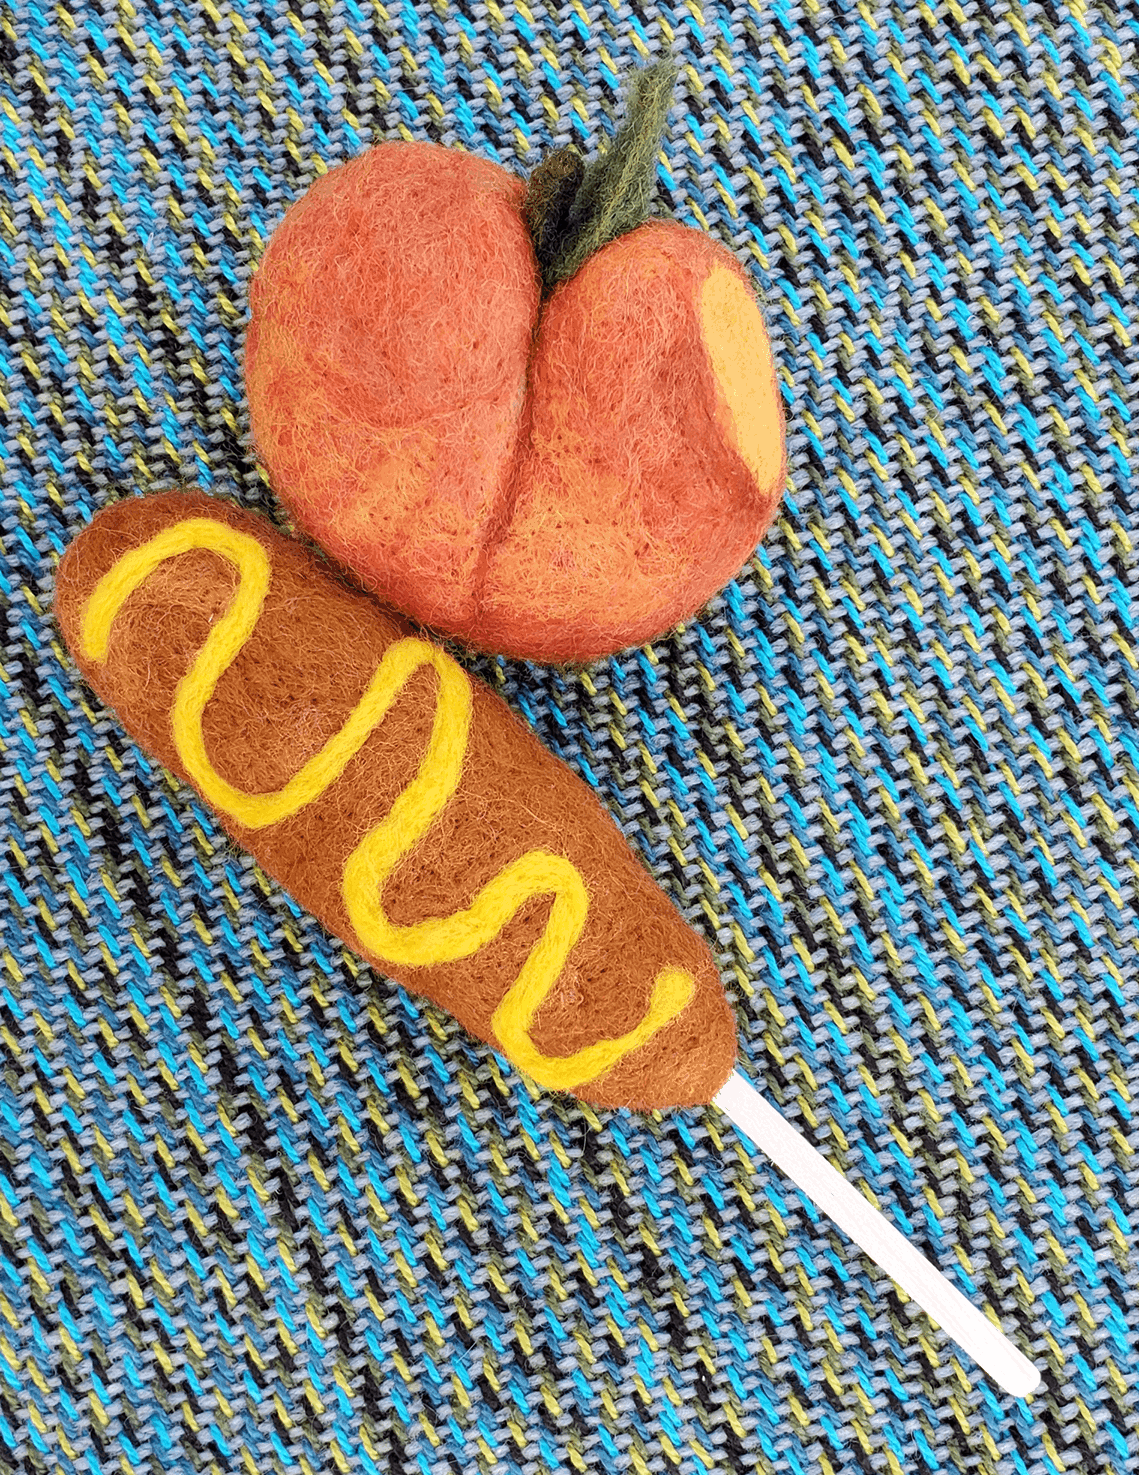 A felted corndog with mustard next to a felted peach